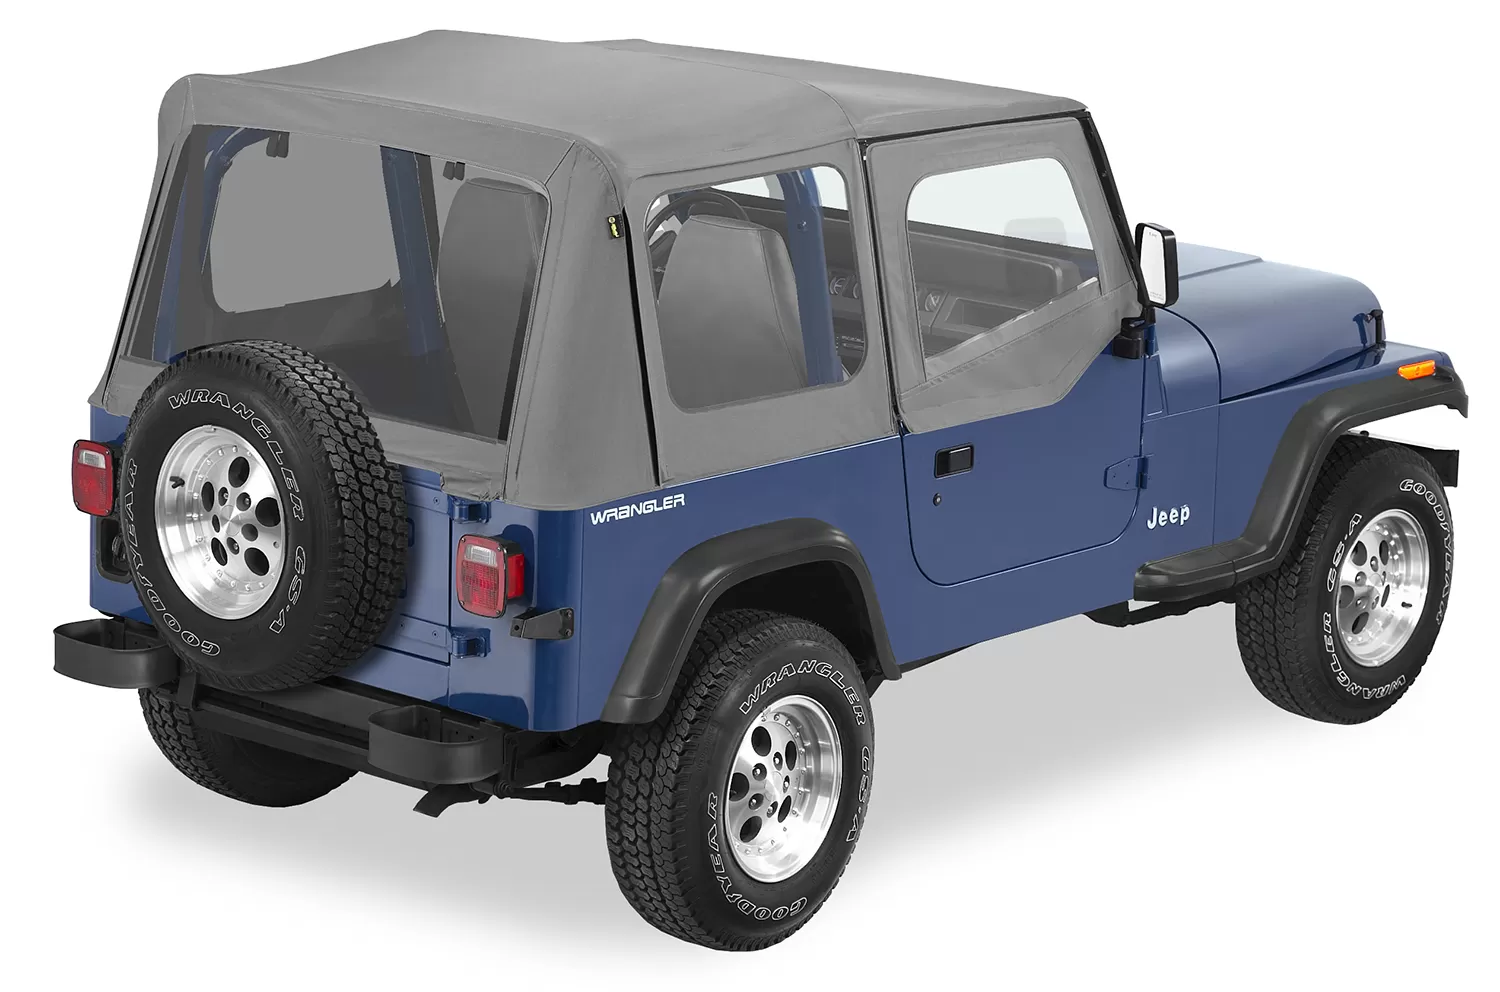 Bestop Charcoal/Gray Replace-A-Top for OEM Hardware Clear Windows w/ Door Skins Jeep Wrangler 1988-1995 - 51120-09